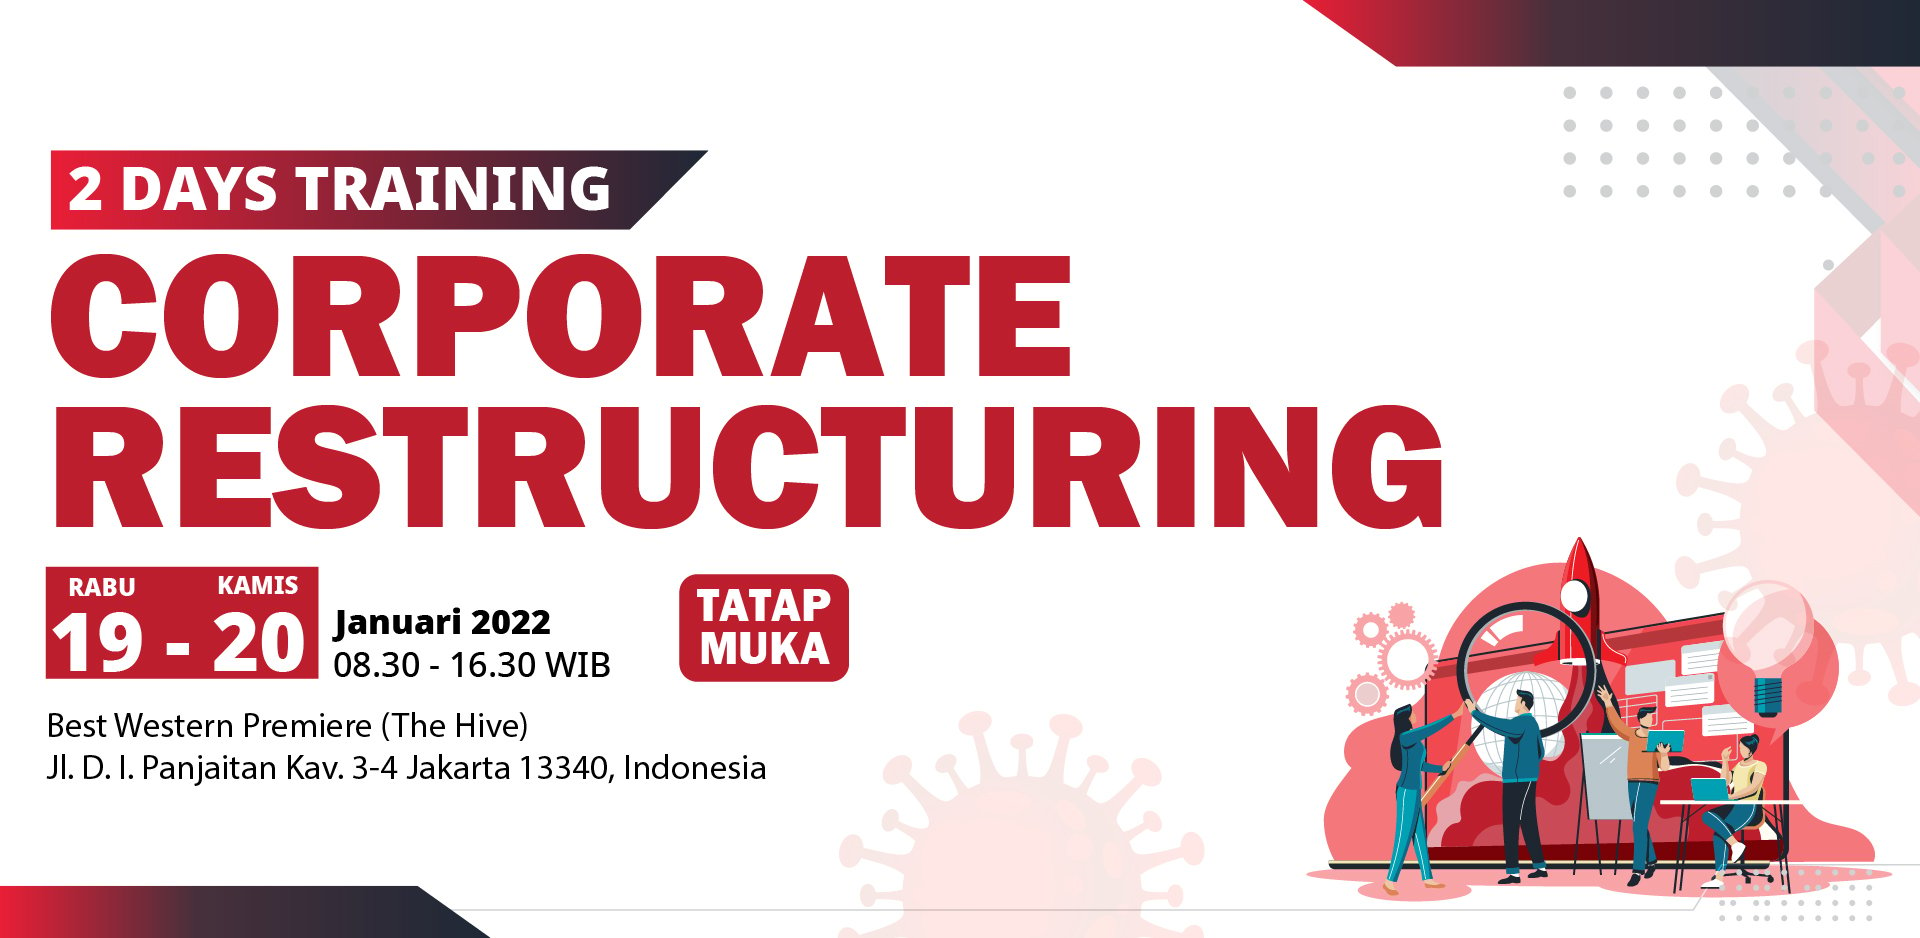 CORPORATE RESTRUCTURING : Efforts To Consolidate Resources and Improve Financial Performance